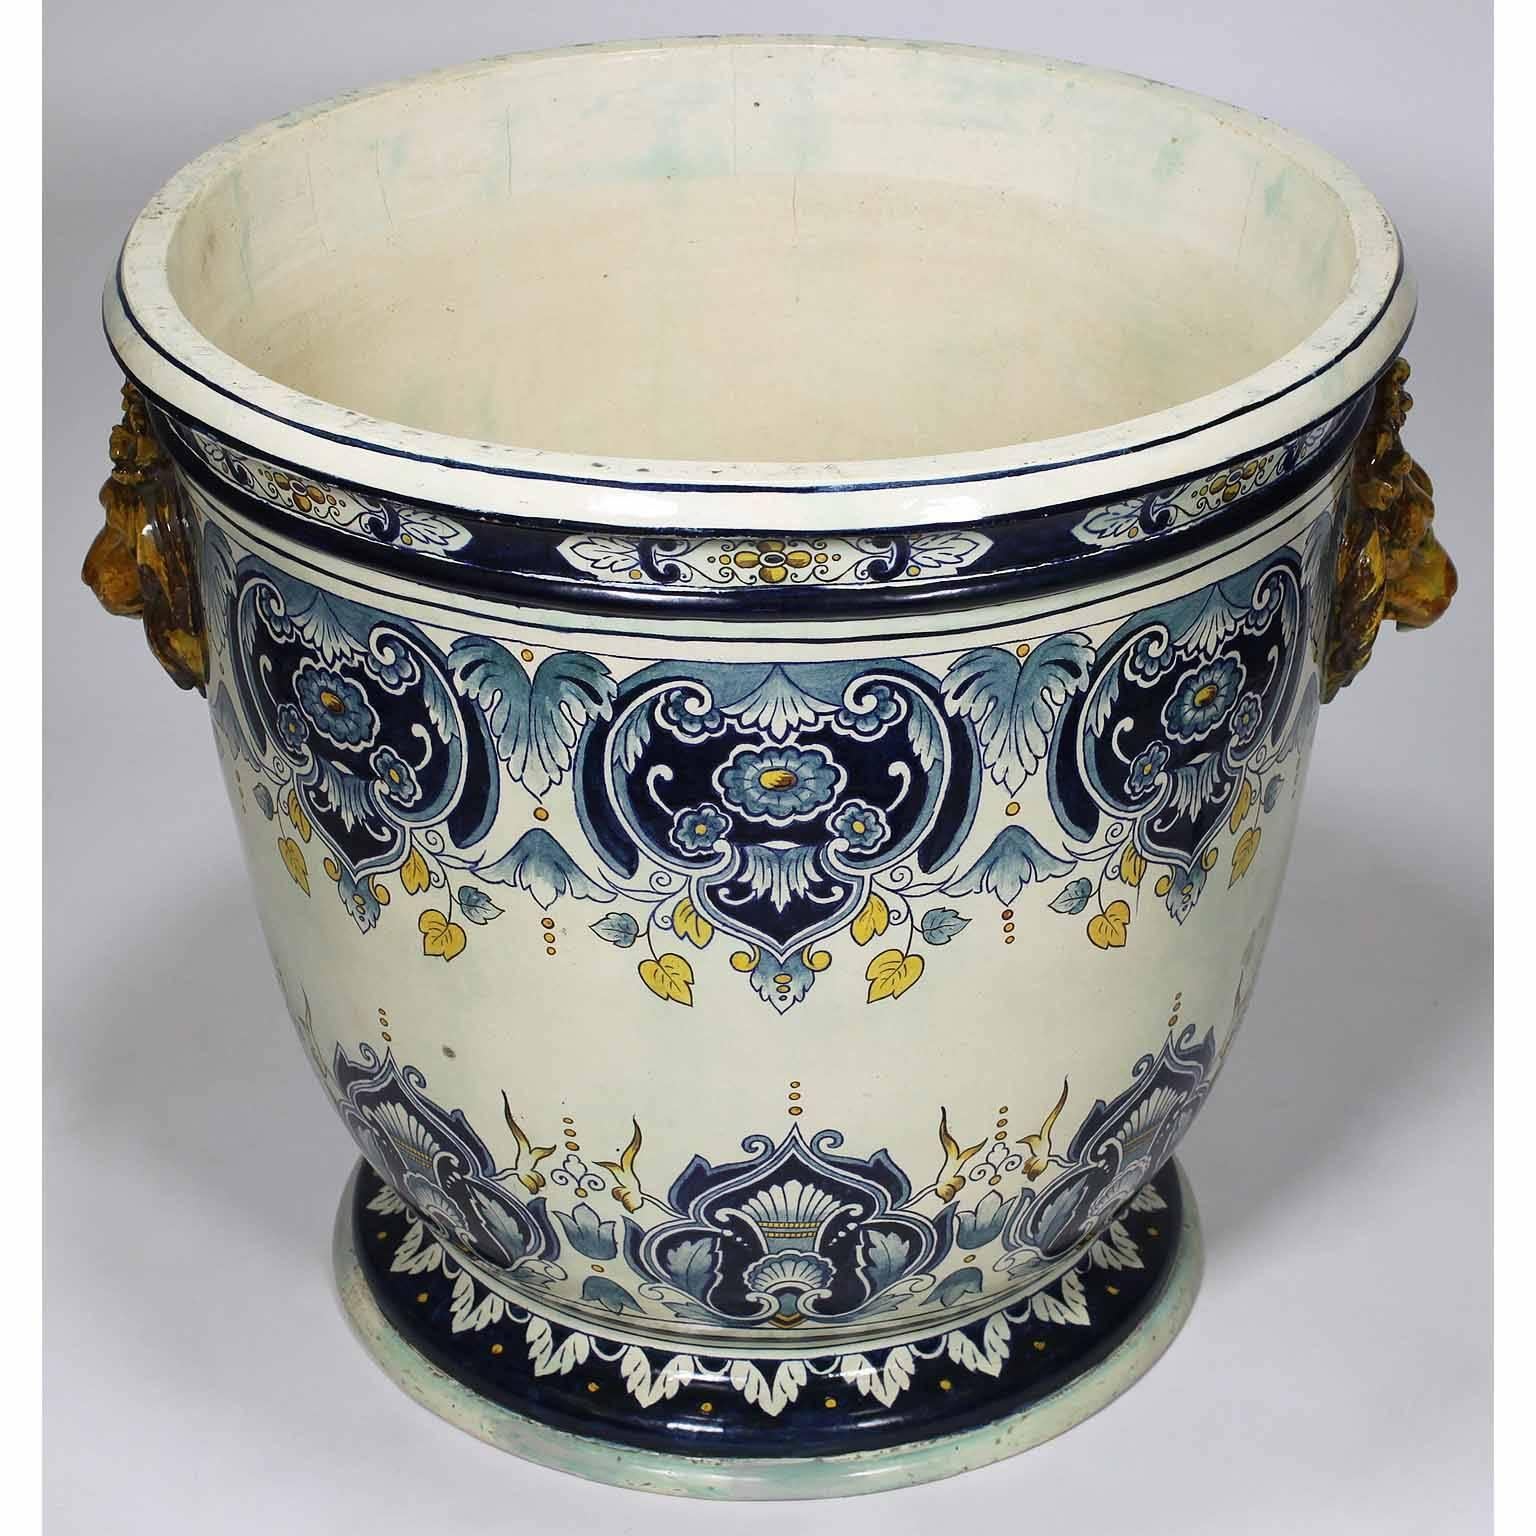 German 19th Century Neoclassical Revival Majolica Jardinière Planter on Stand 3